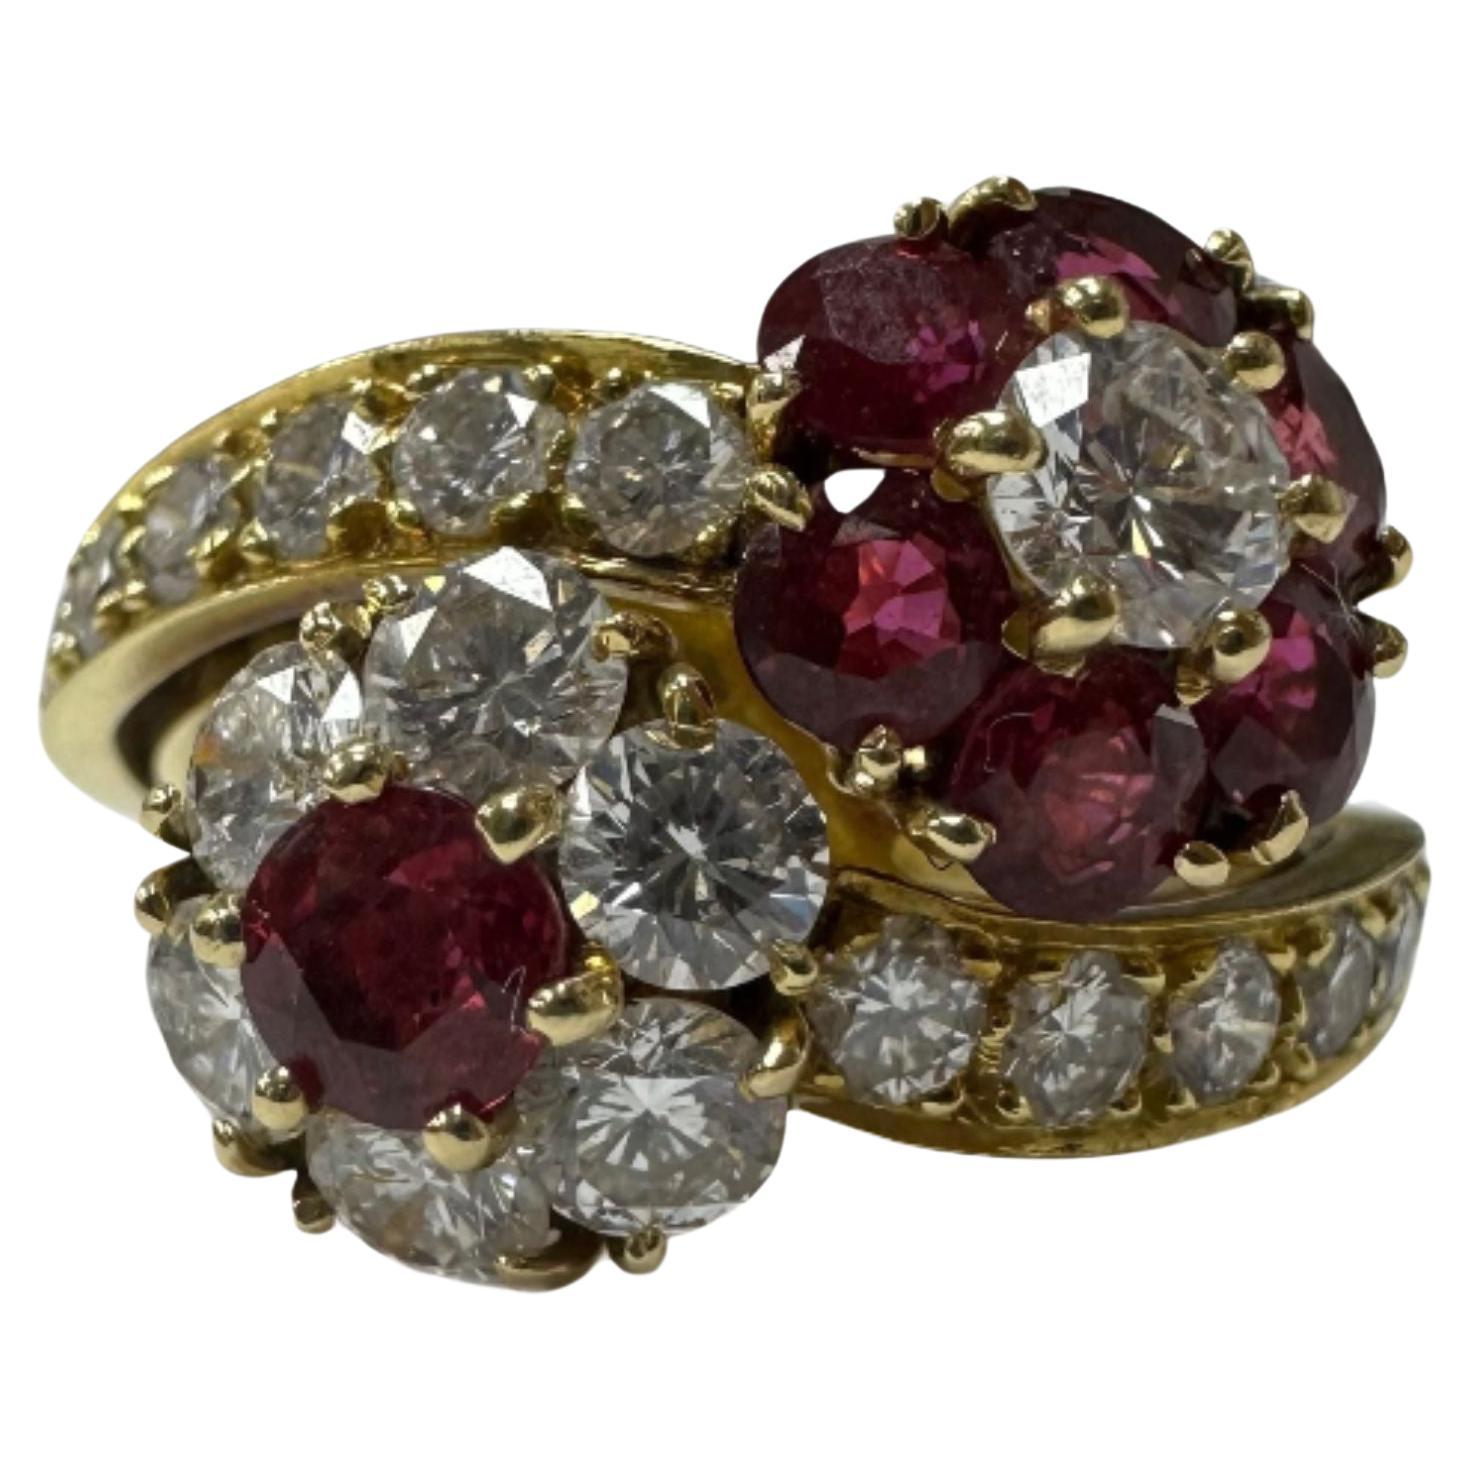 18k Estate Van Cleef & Arpels Diamond and Ruby Bypass Ring